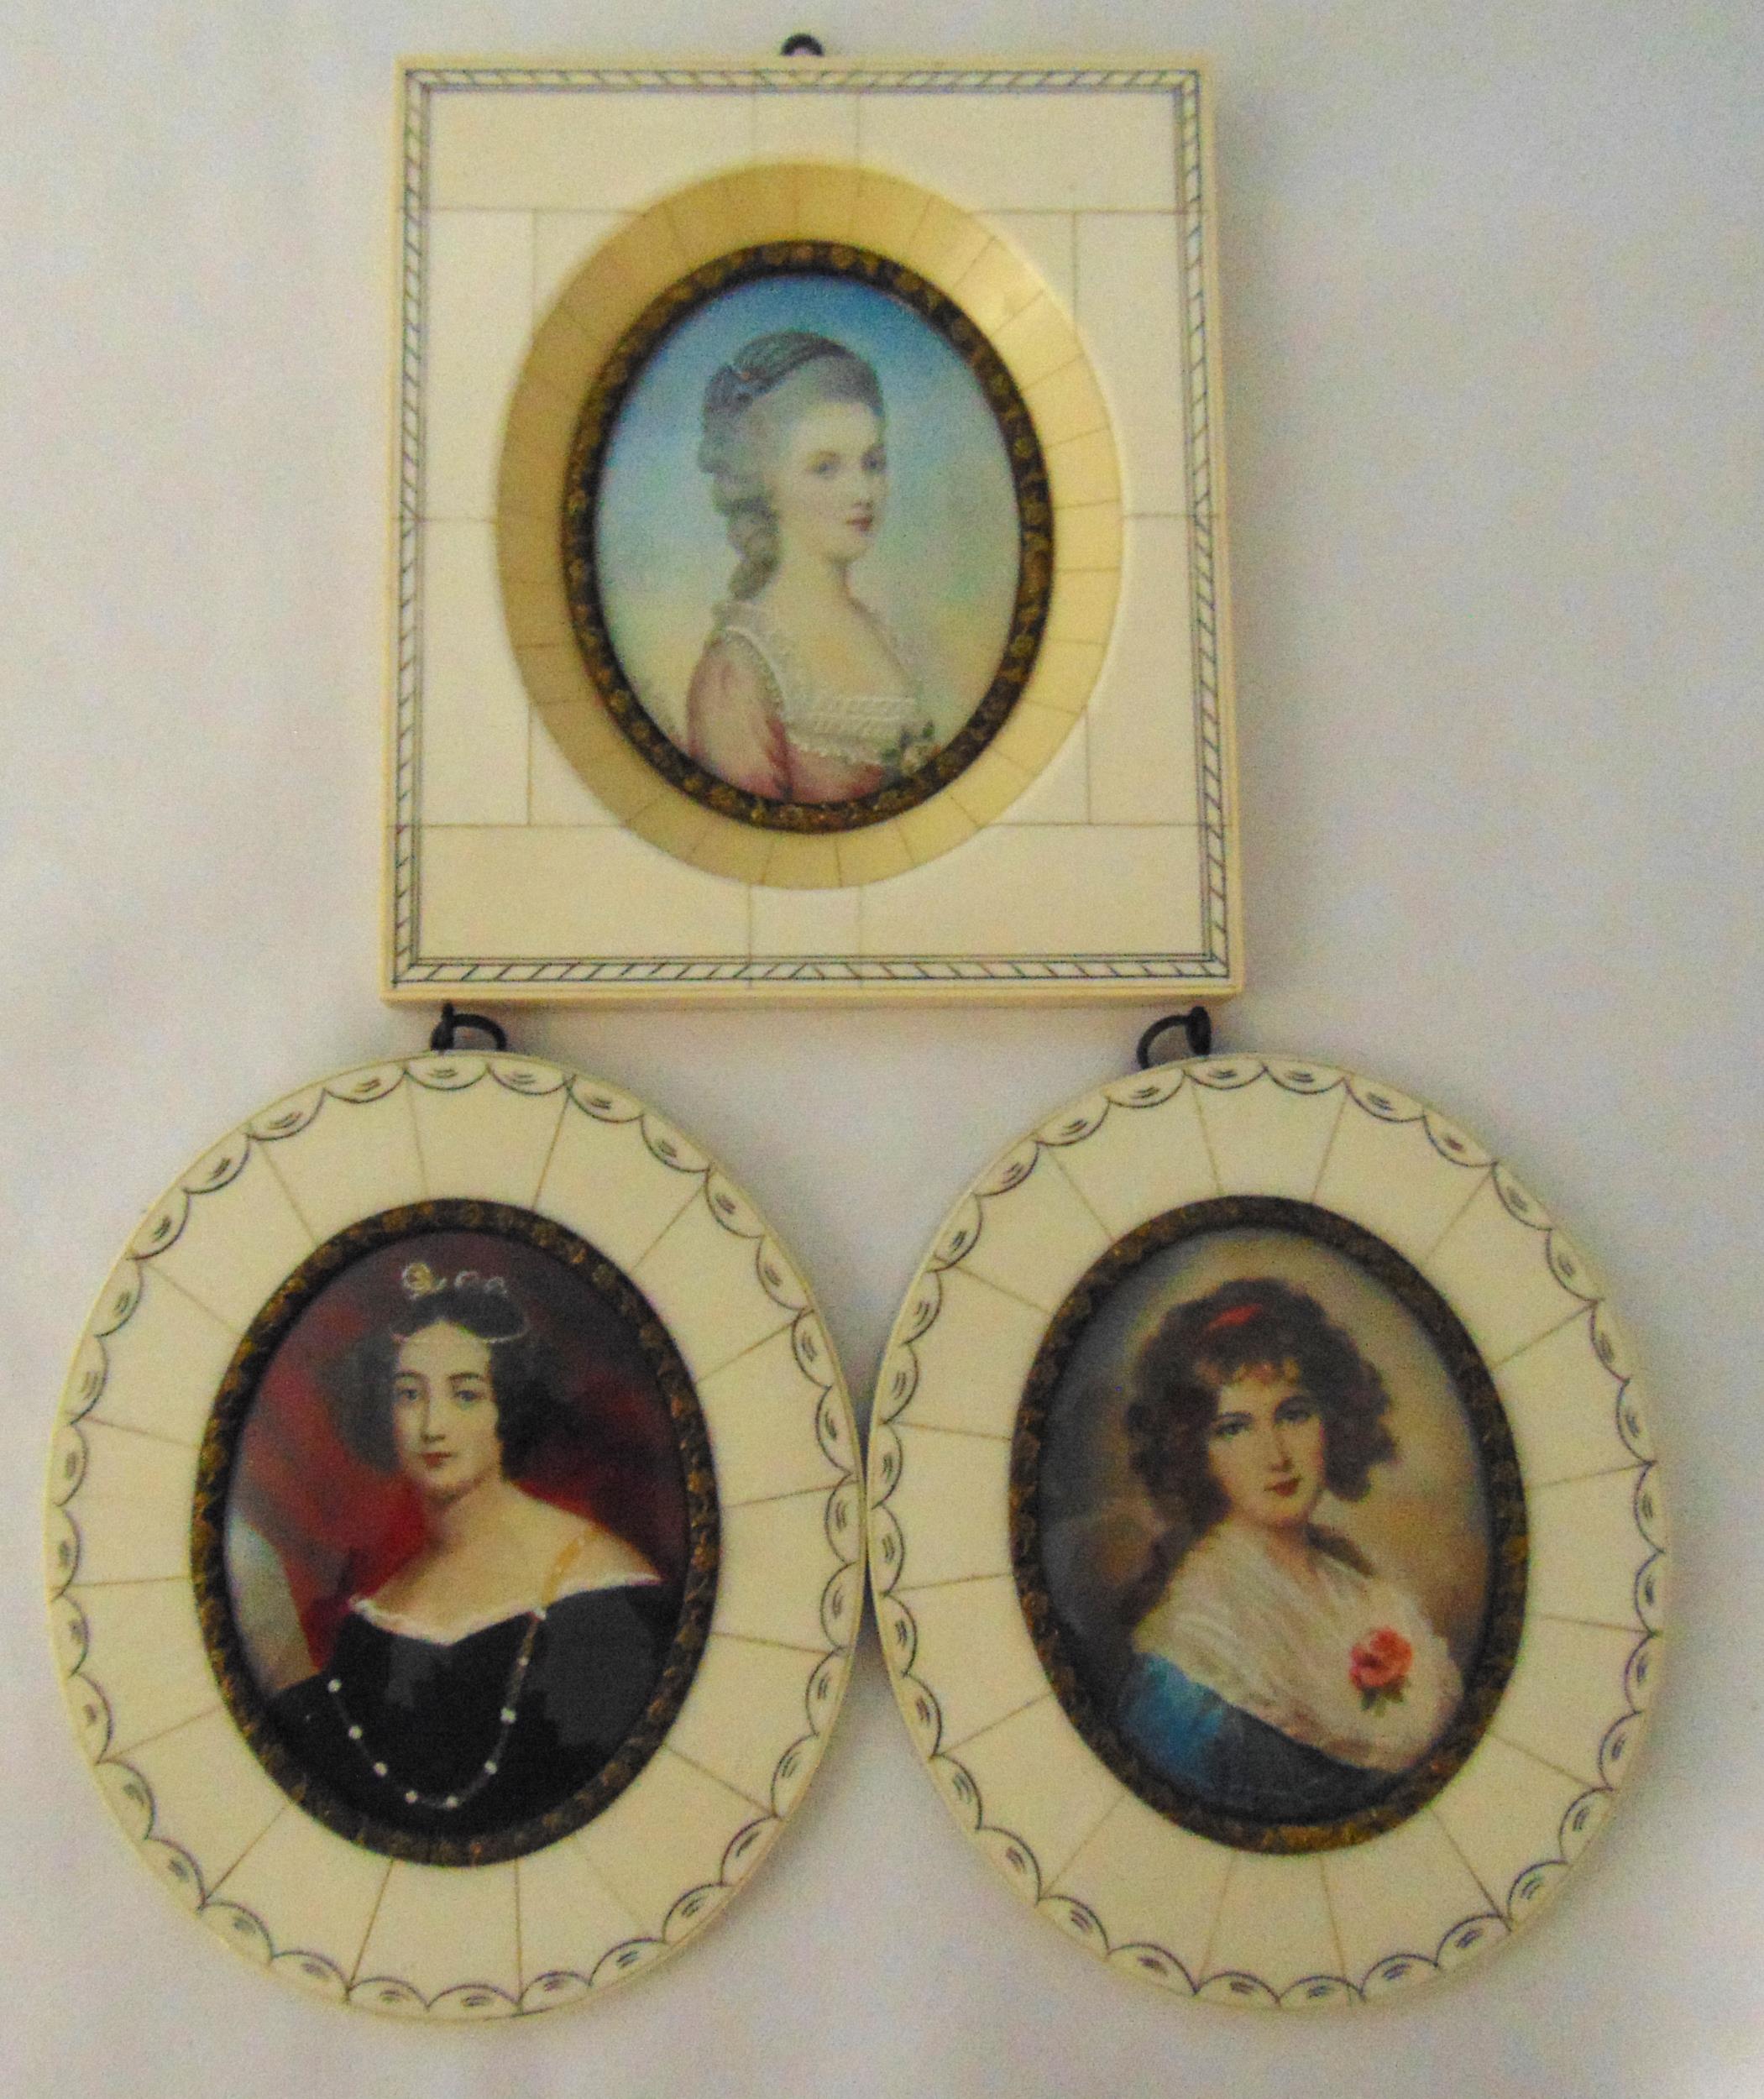 Three framed and glazed portrait miniatures of ladies in 18th century attire